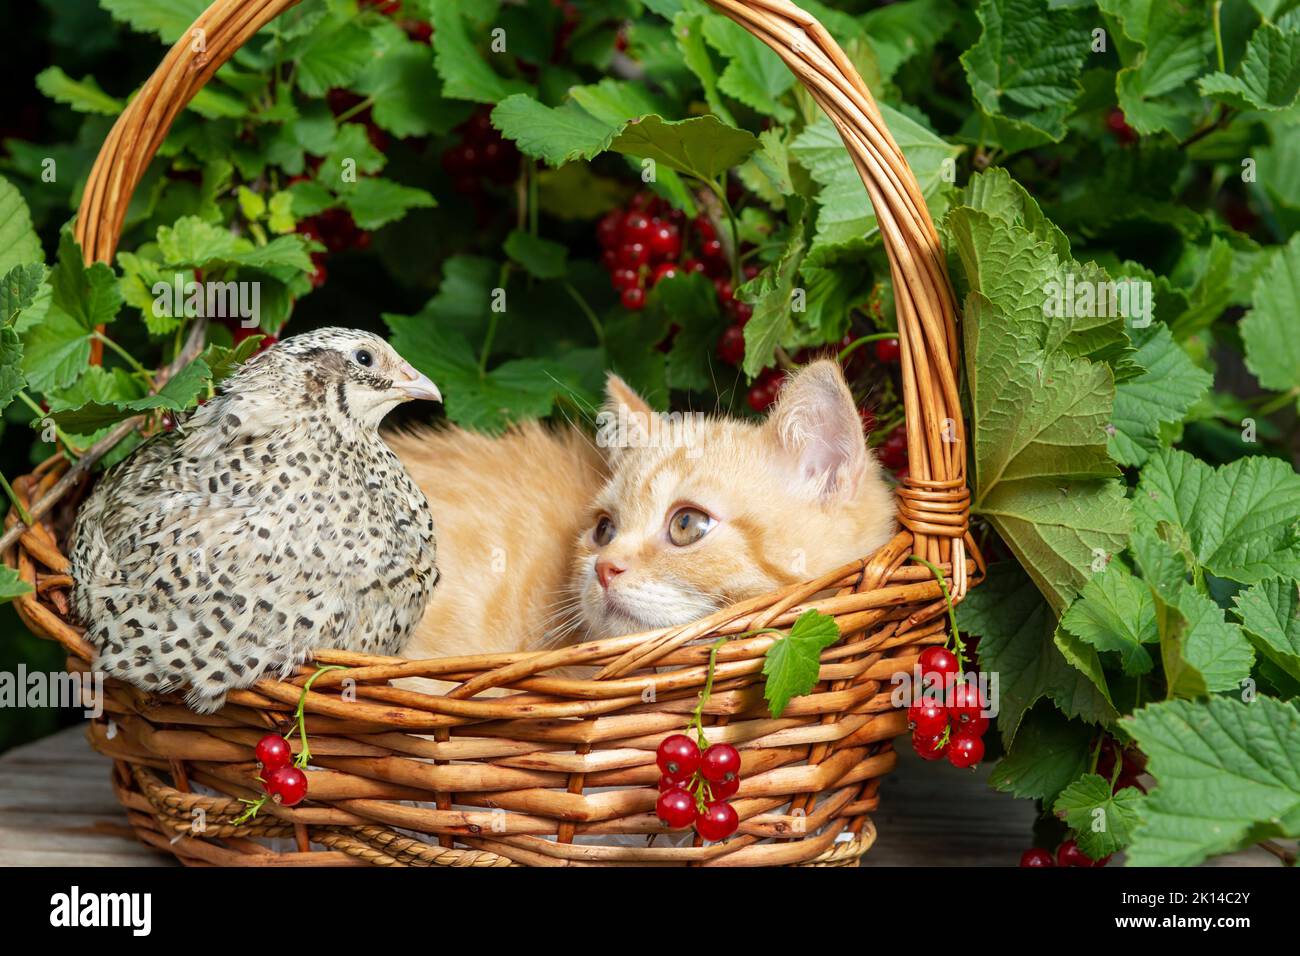 A British red-haired shorthair kitten is sitting in a basket made of a vine with a quail bird on the background of a currant bush with red berries. Th Stock Photo